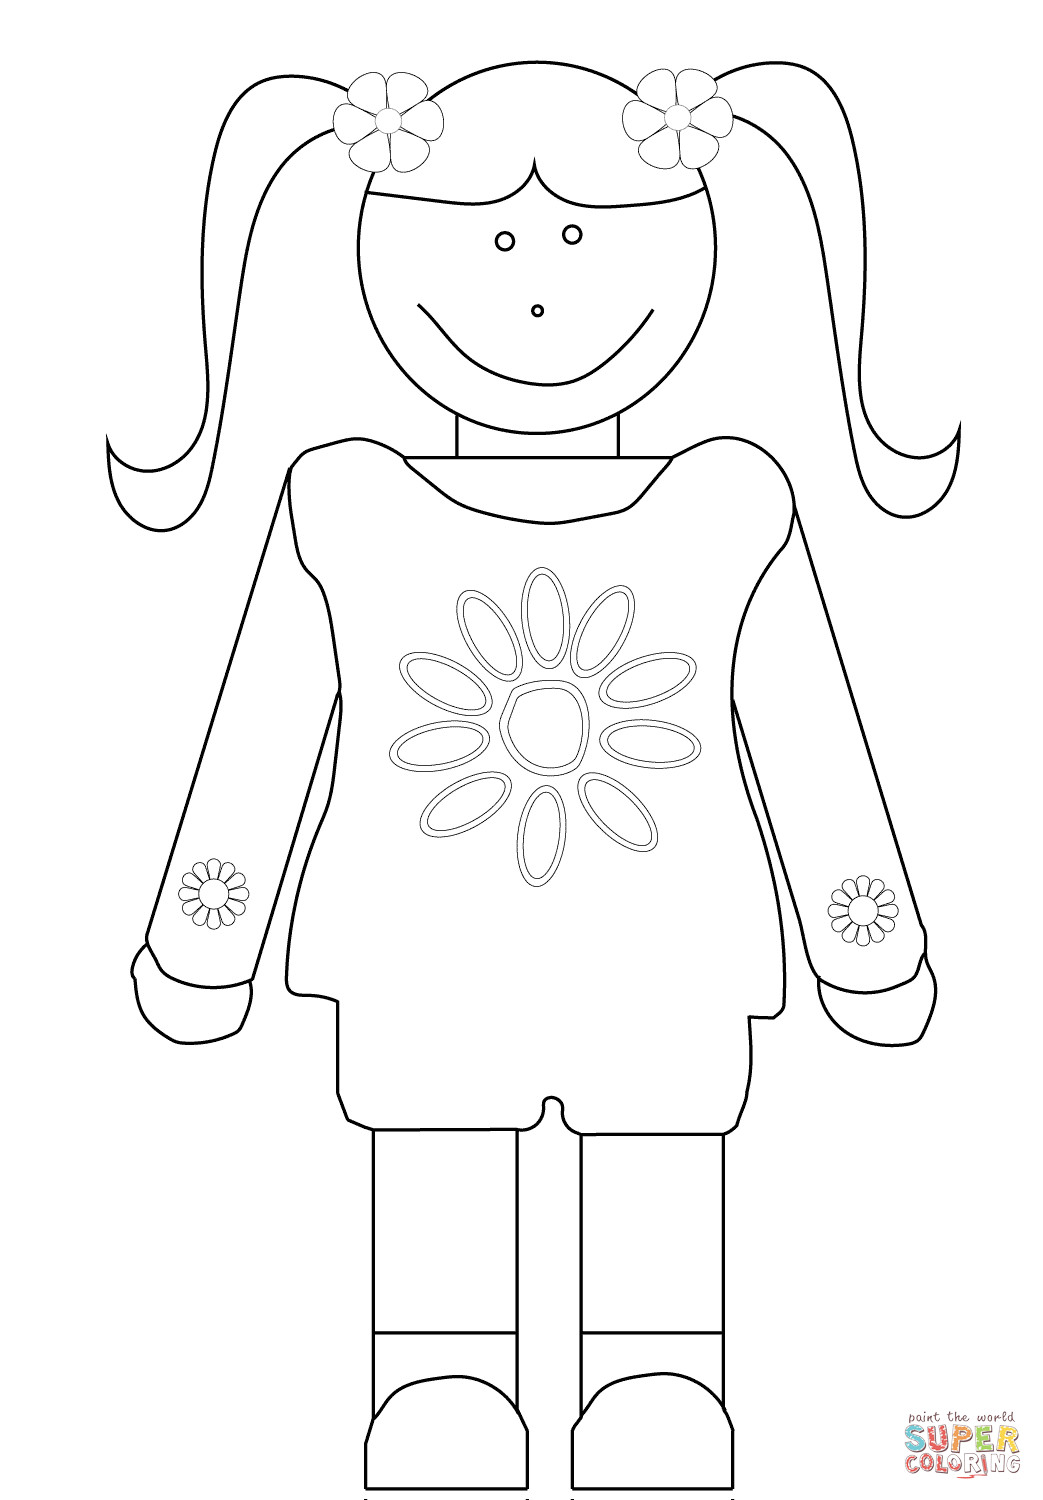 Girl Scout Daisies Coloring Pages
 daisy girl scout coloring sheets free